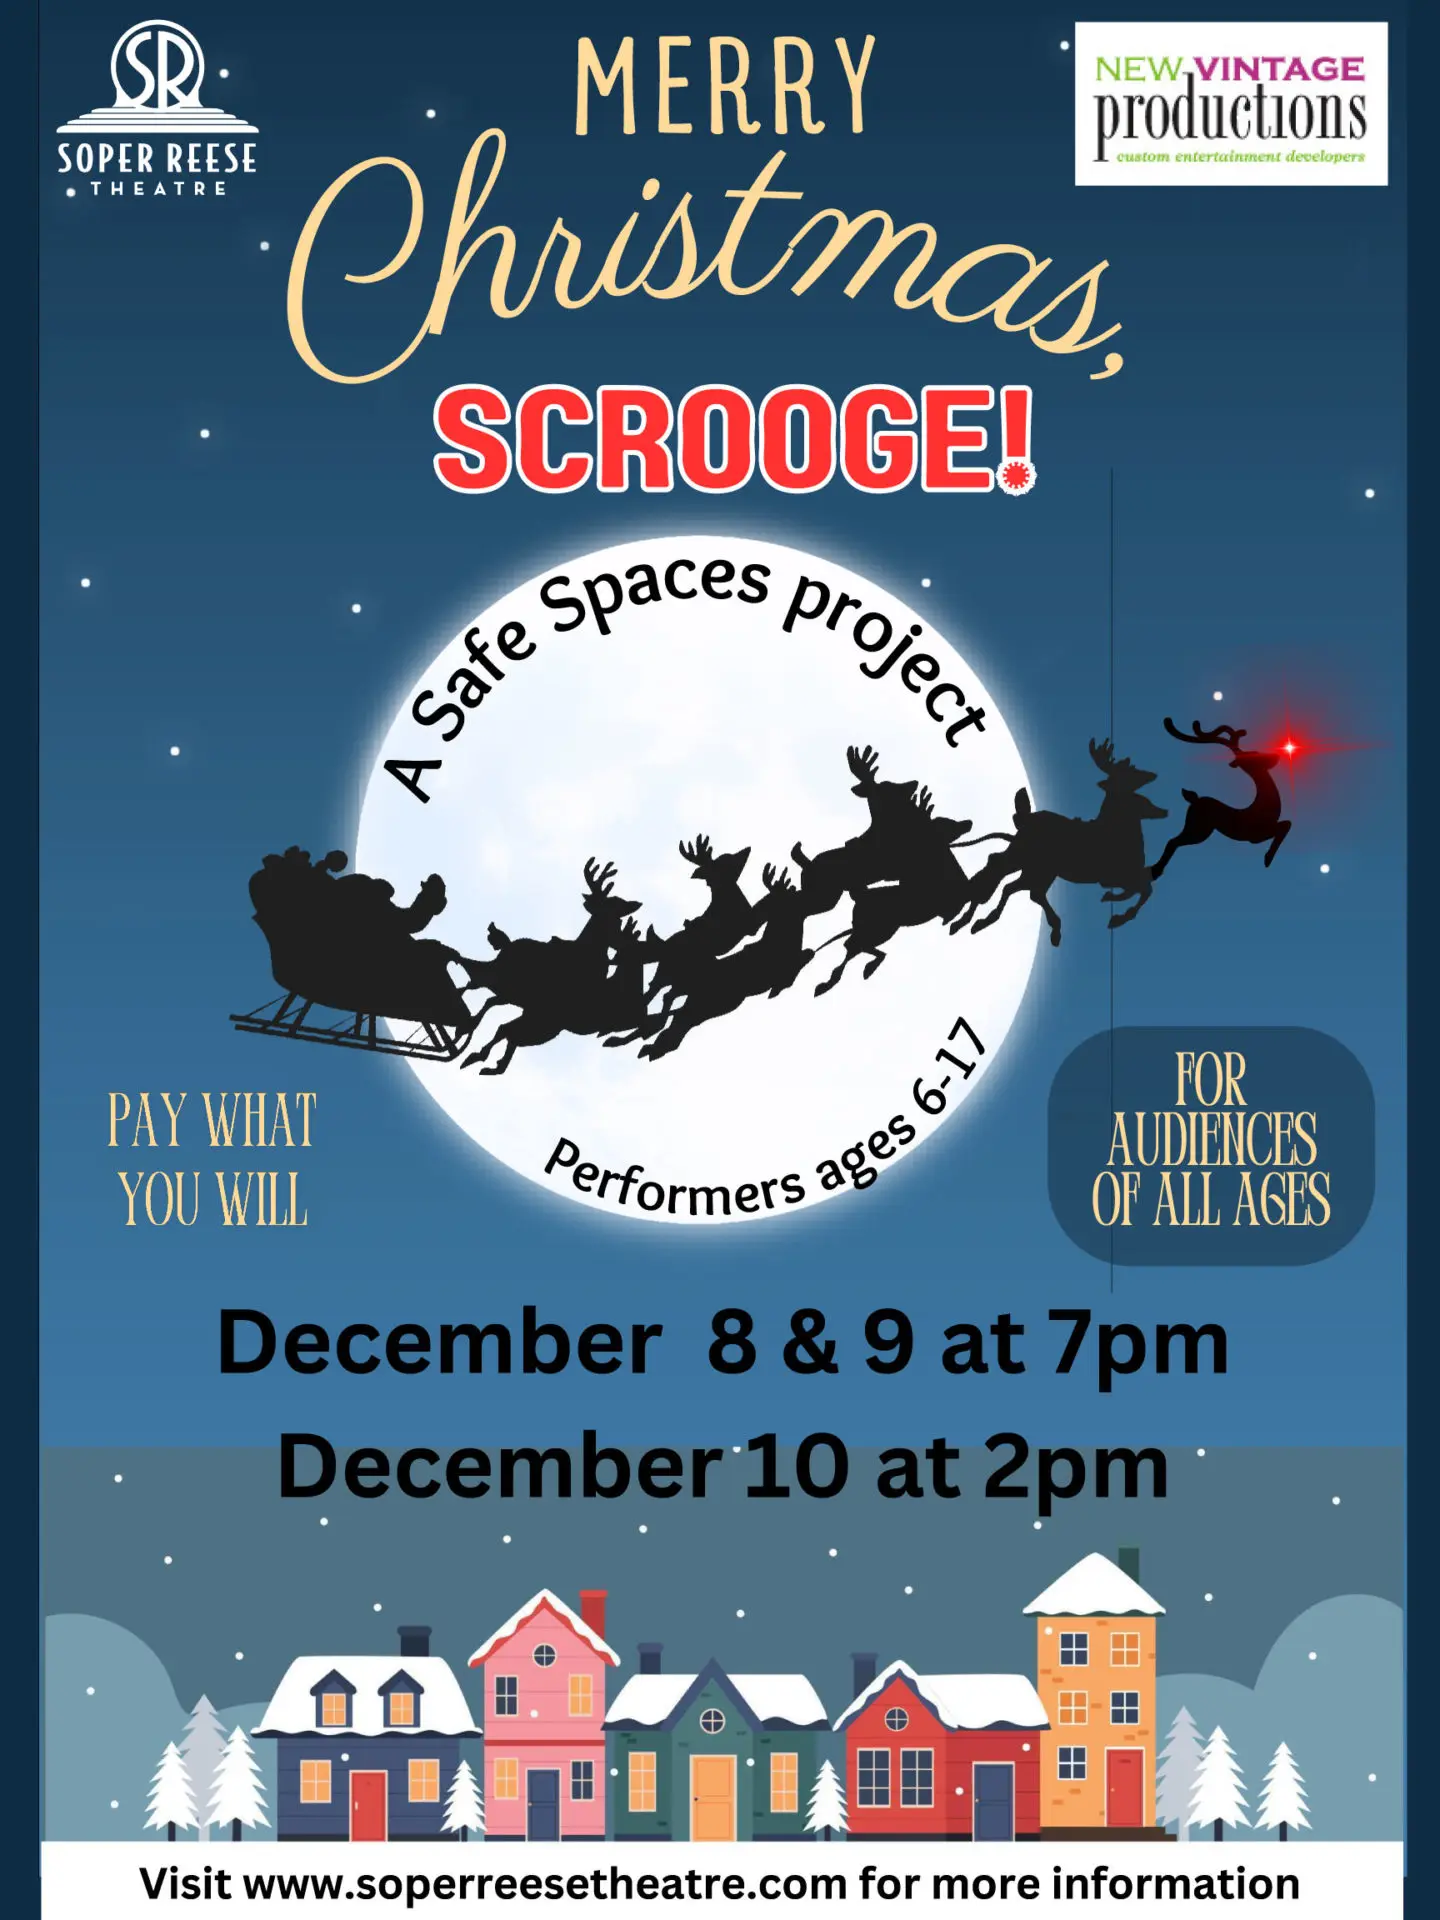 "Merry Christmas, Scrooge" poster shows Santa and his reindeer in profile, flying against a full moon